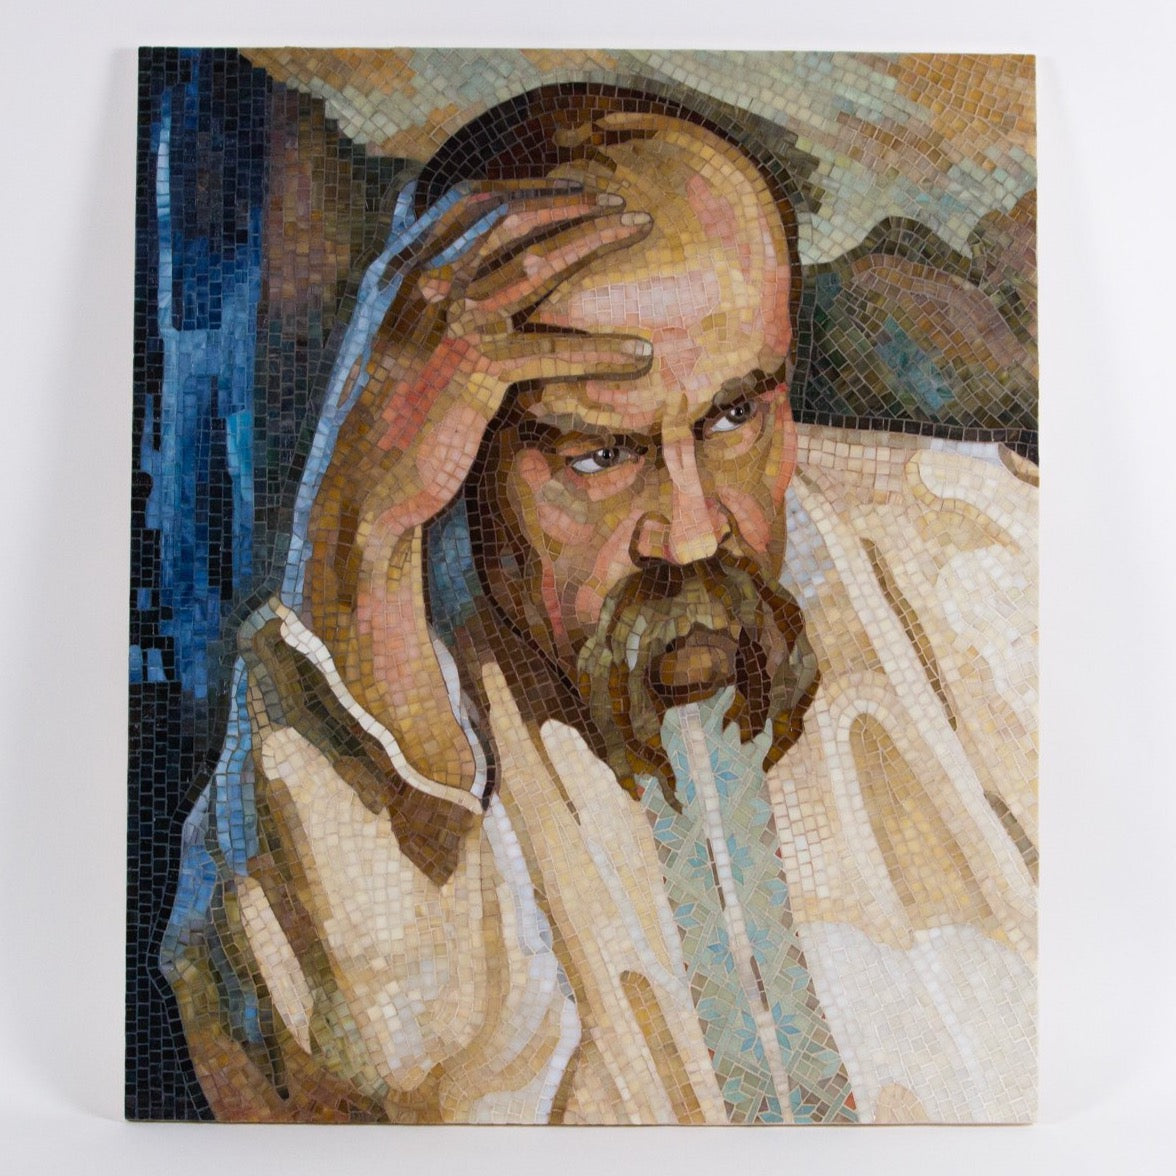 Stained glass mosaic wall hanging depicting Taras Shevchenko's portrait